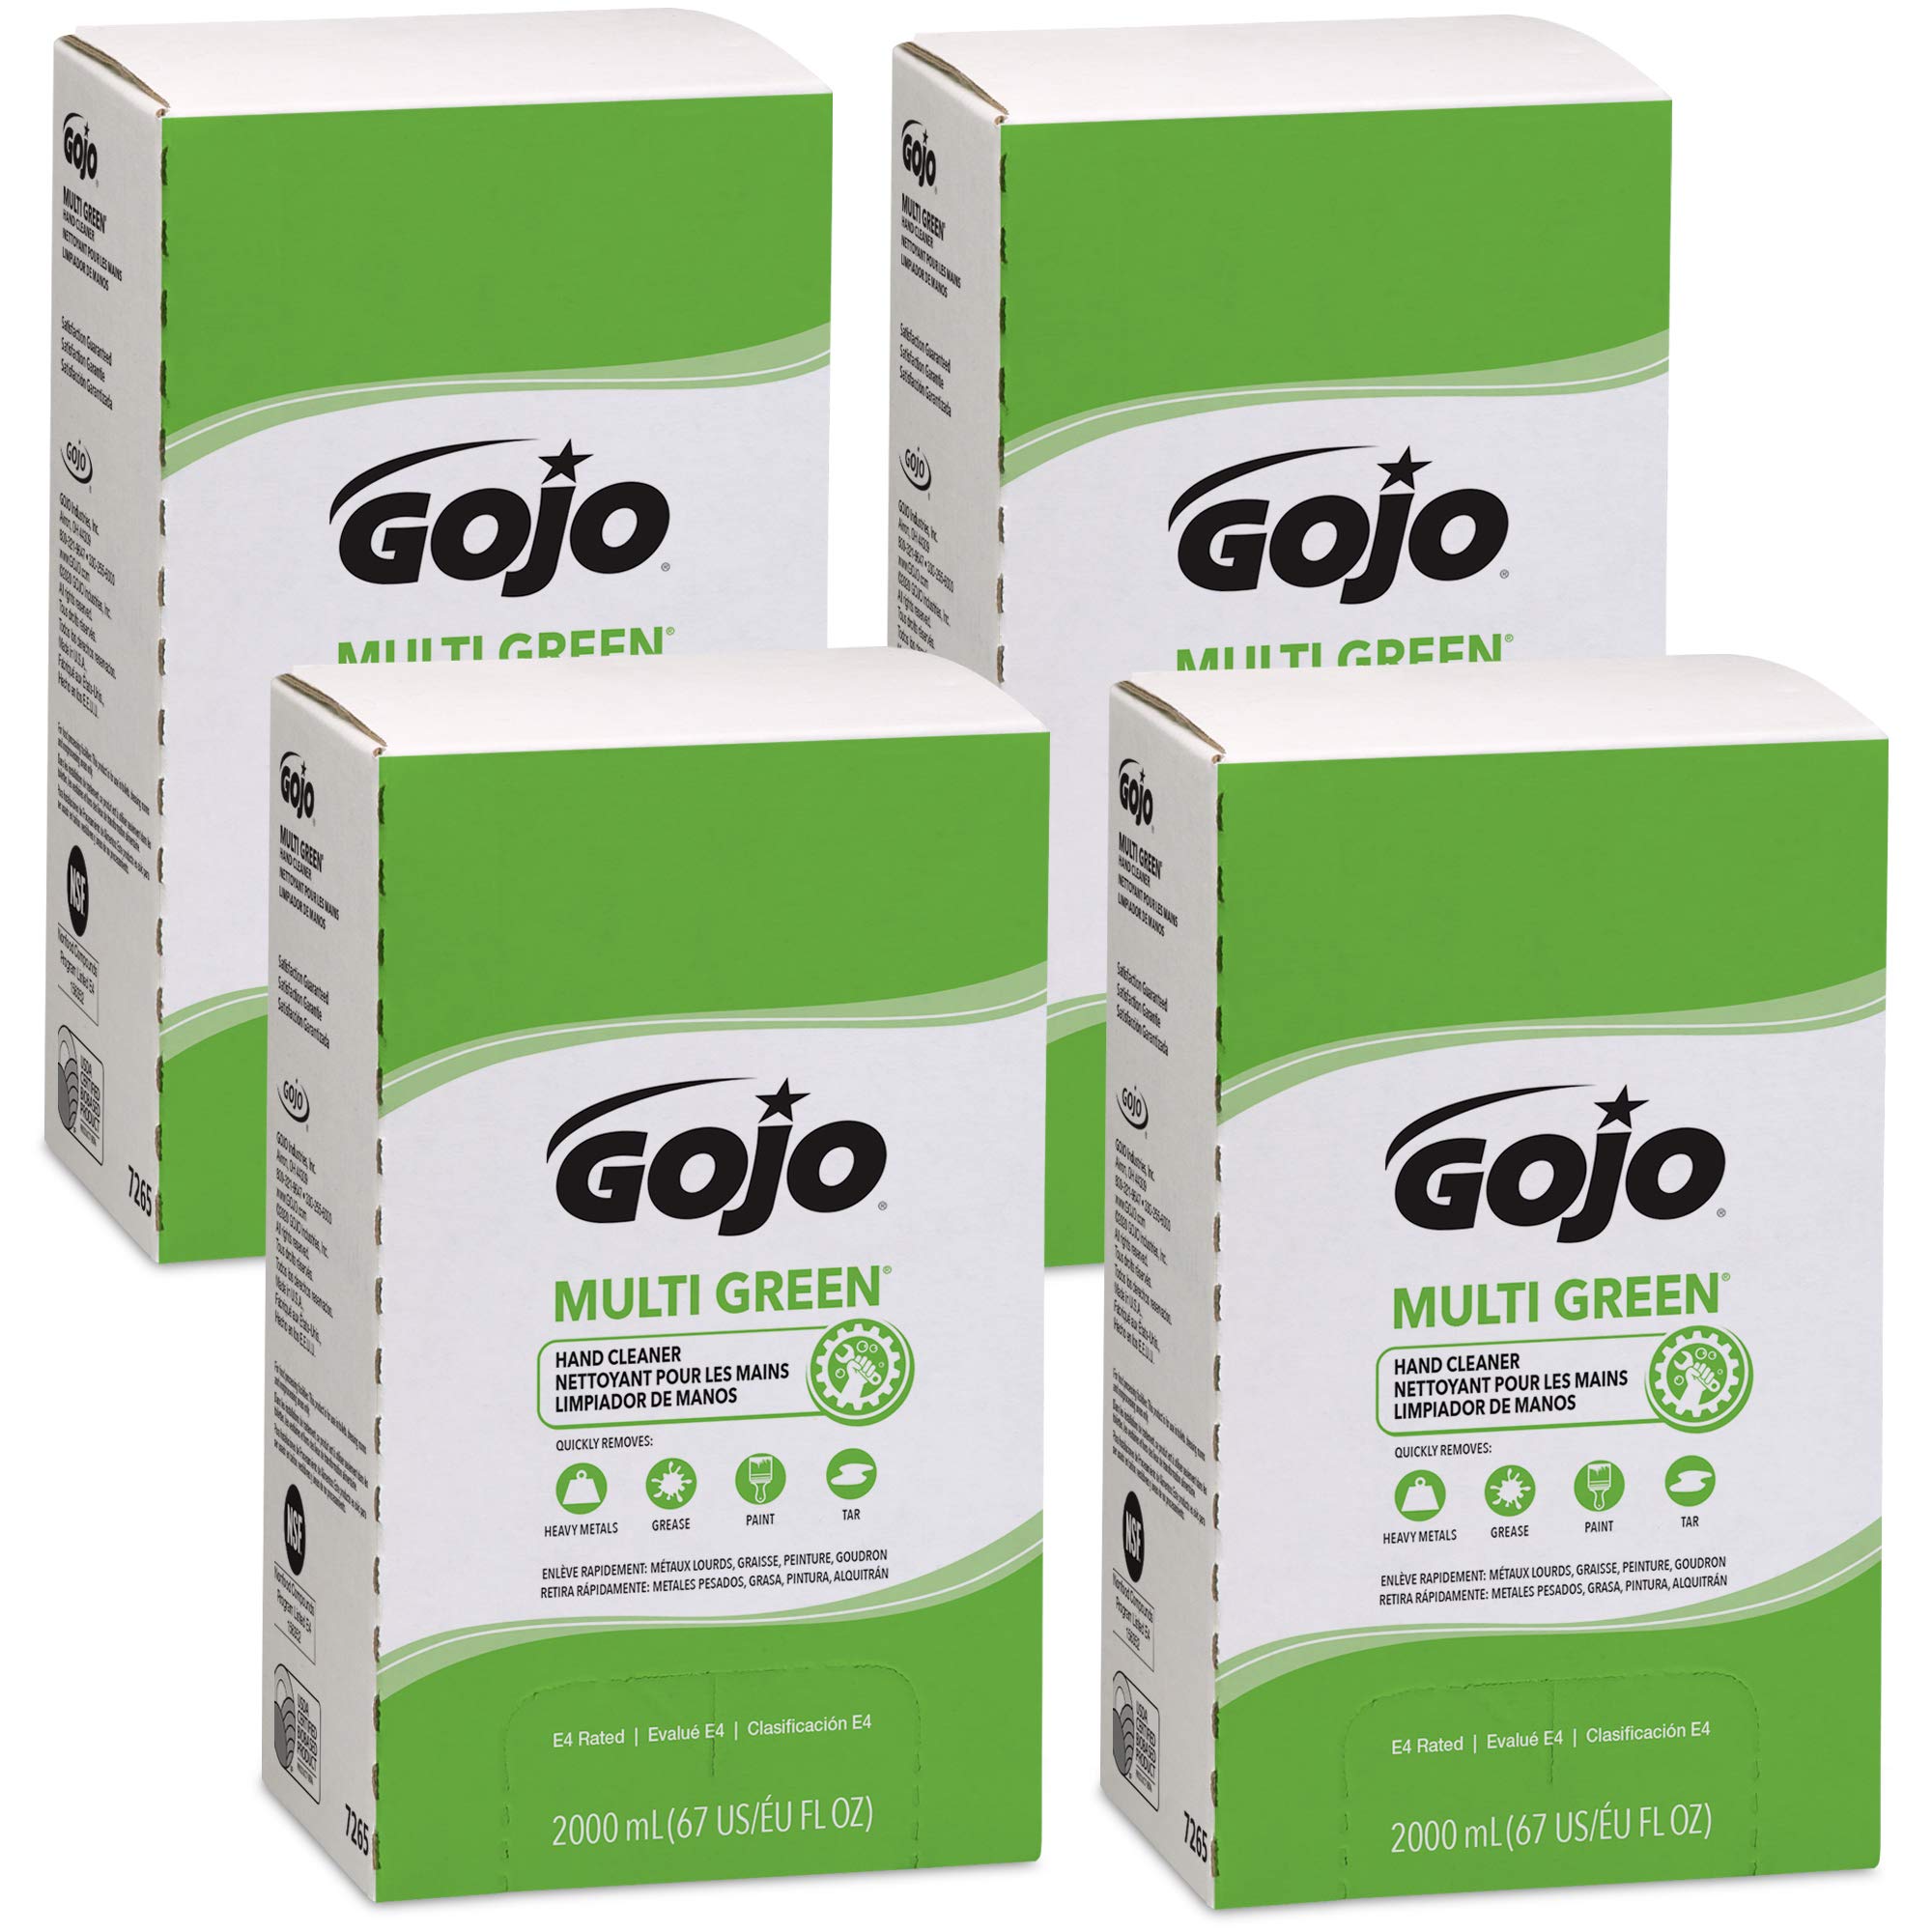 Gojo MULTI GREEN Hand Cleaner, Natural Citrus Solvent, 2000 mL, USDA Certified Biobased Product Hand Cleaner with Natural Pumice Refill PRO TDX Push Style Dispenser (Pack of 4) - 7265-04